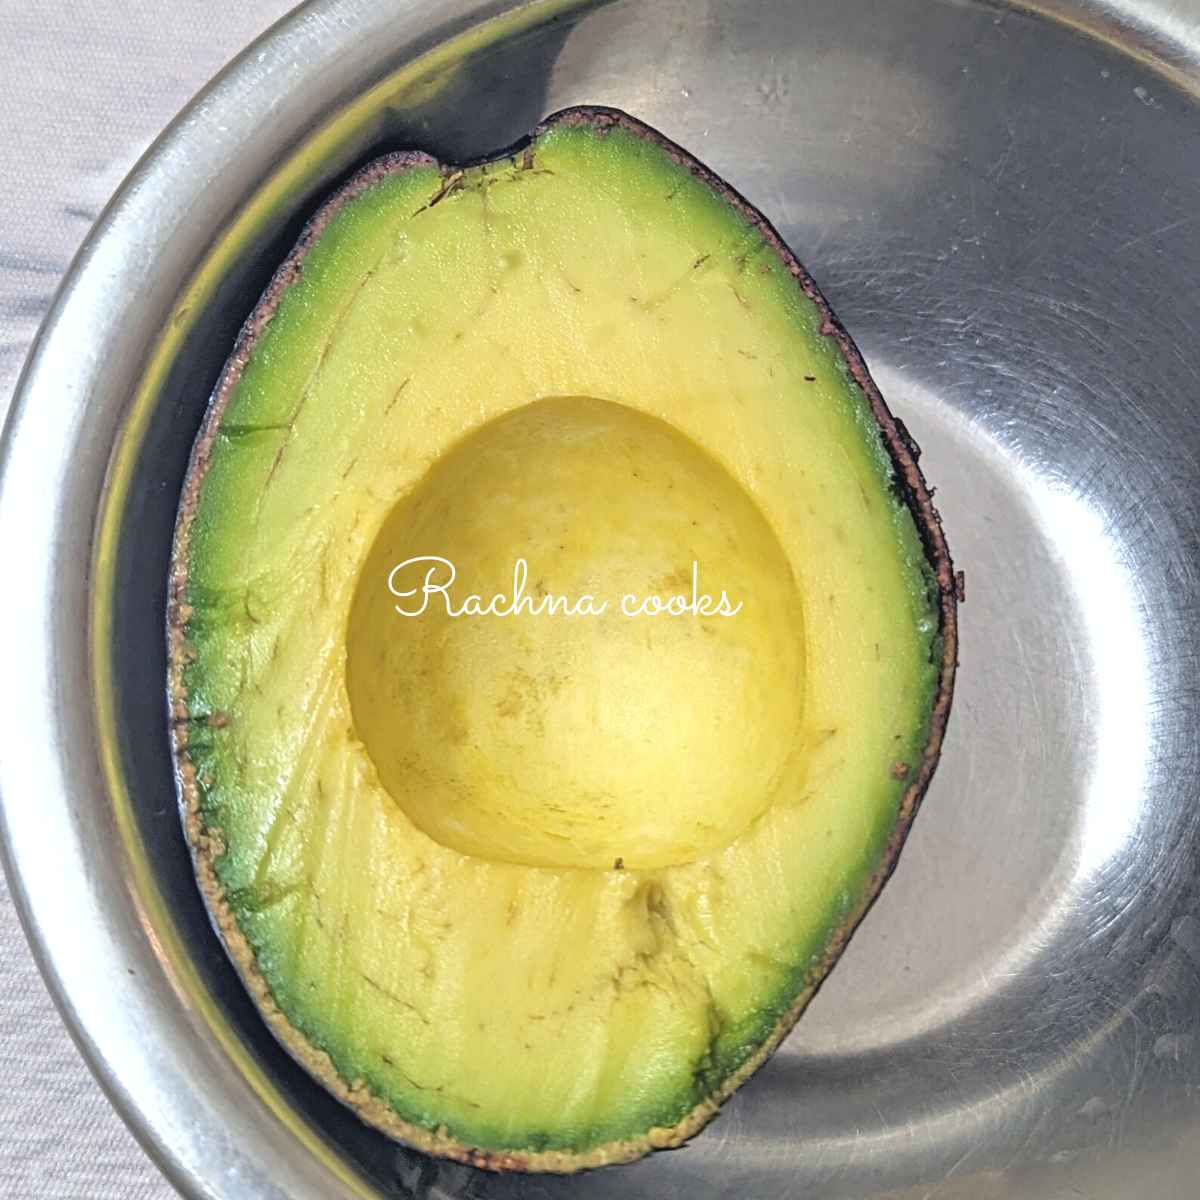 Half of an avocado after removing the pit.